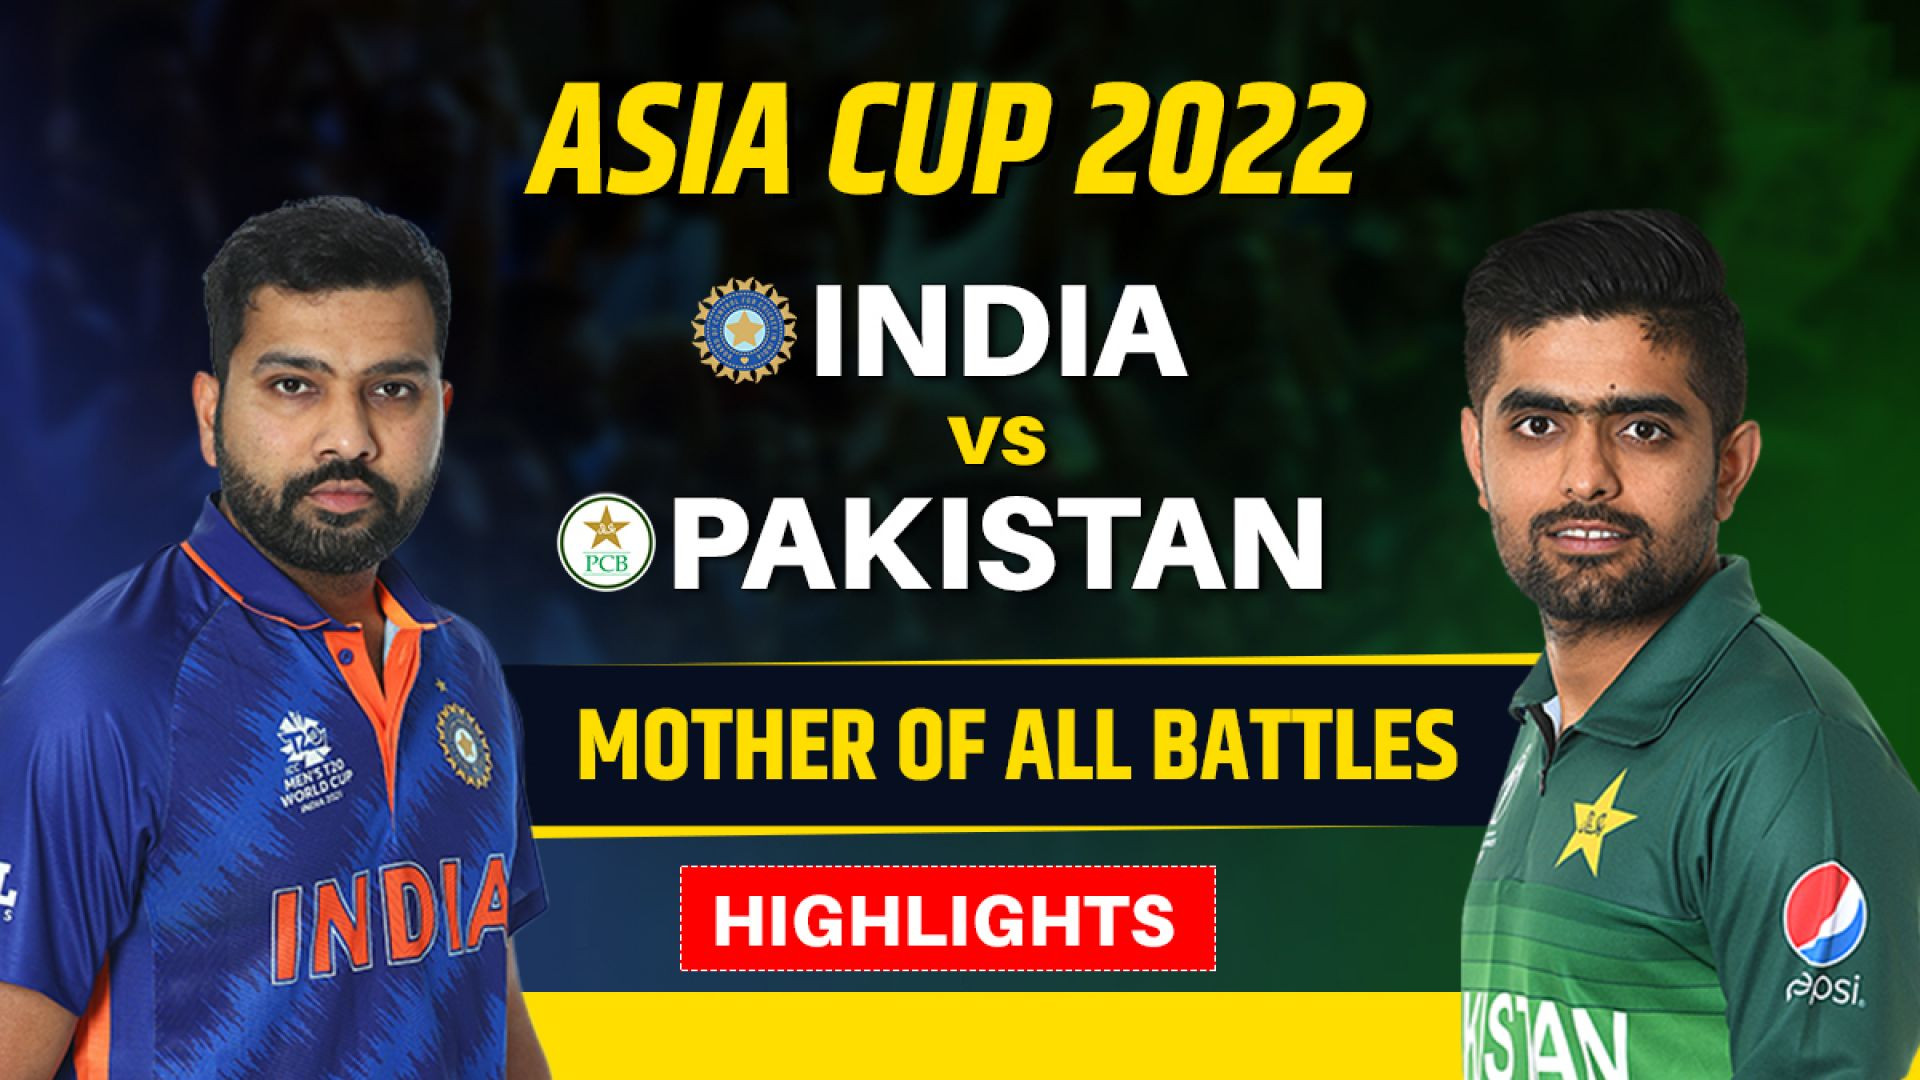 India v Pakistan - Match Highlights | Asia Cup 2022